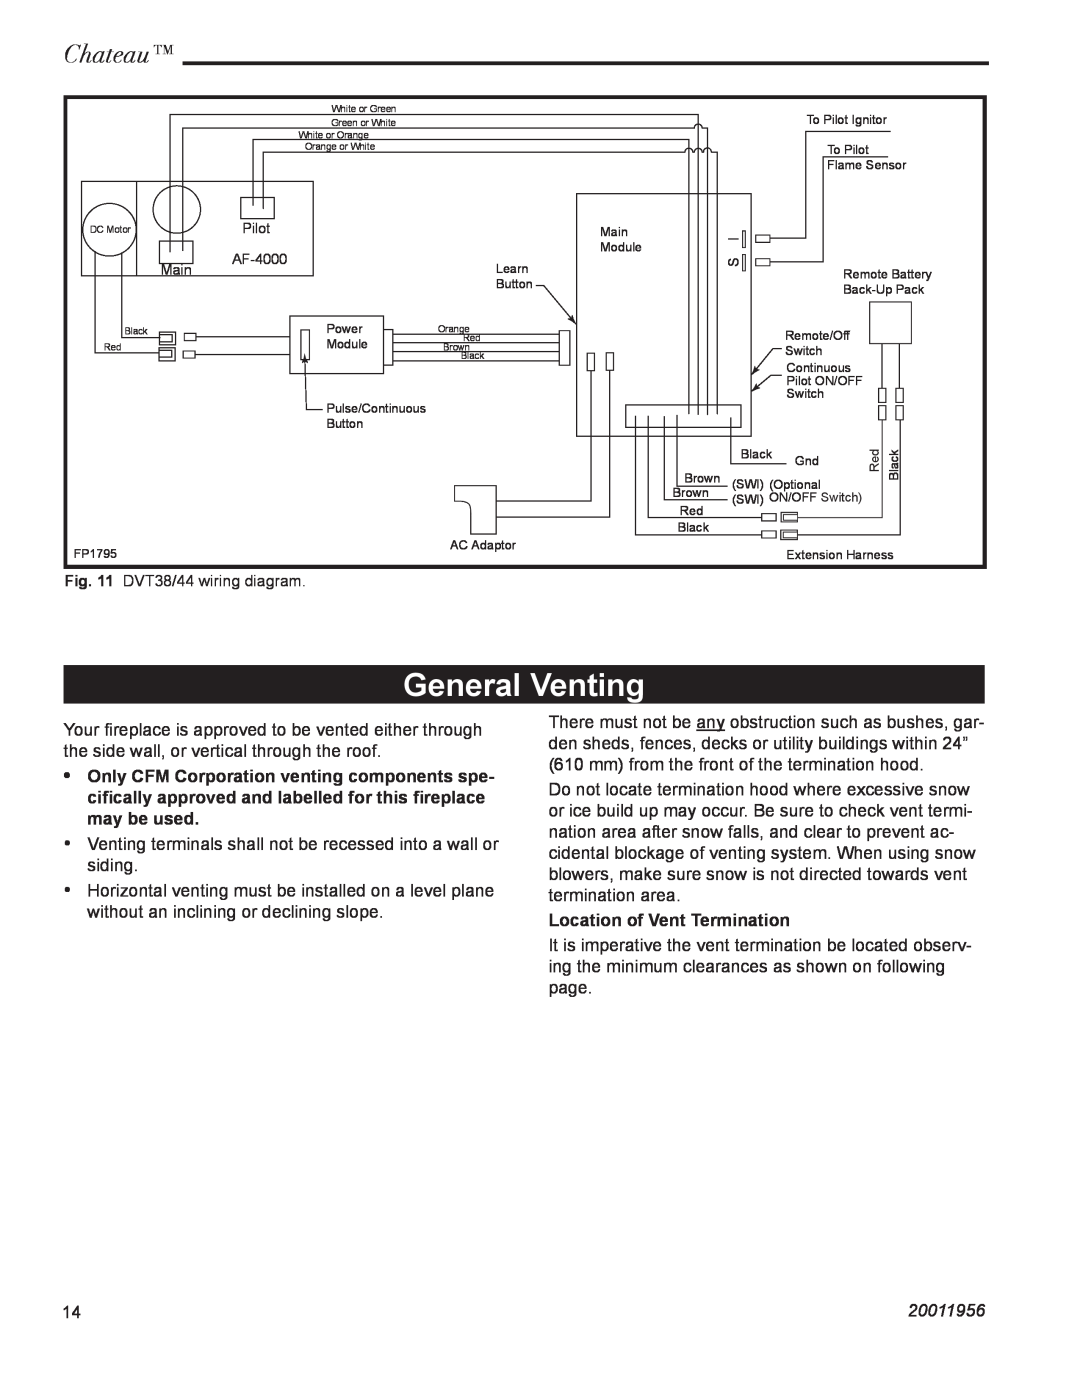 CFM Corporation DVT44IN, DVT38IN installation instructions General Venting, Chateau, Location of Vent Termination, 20011956 